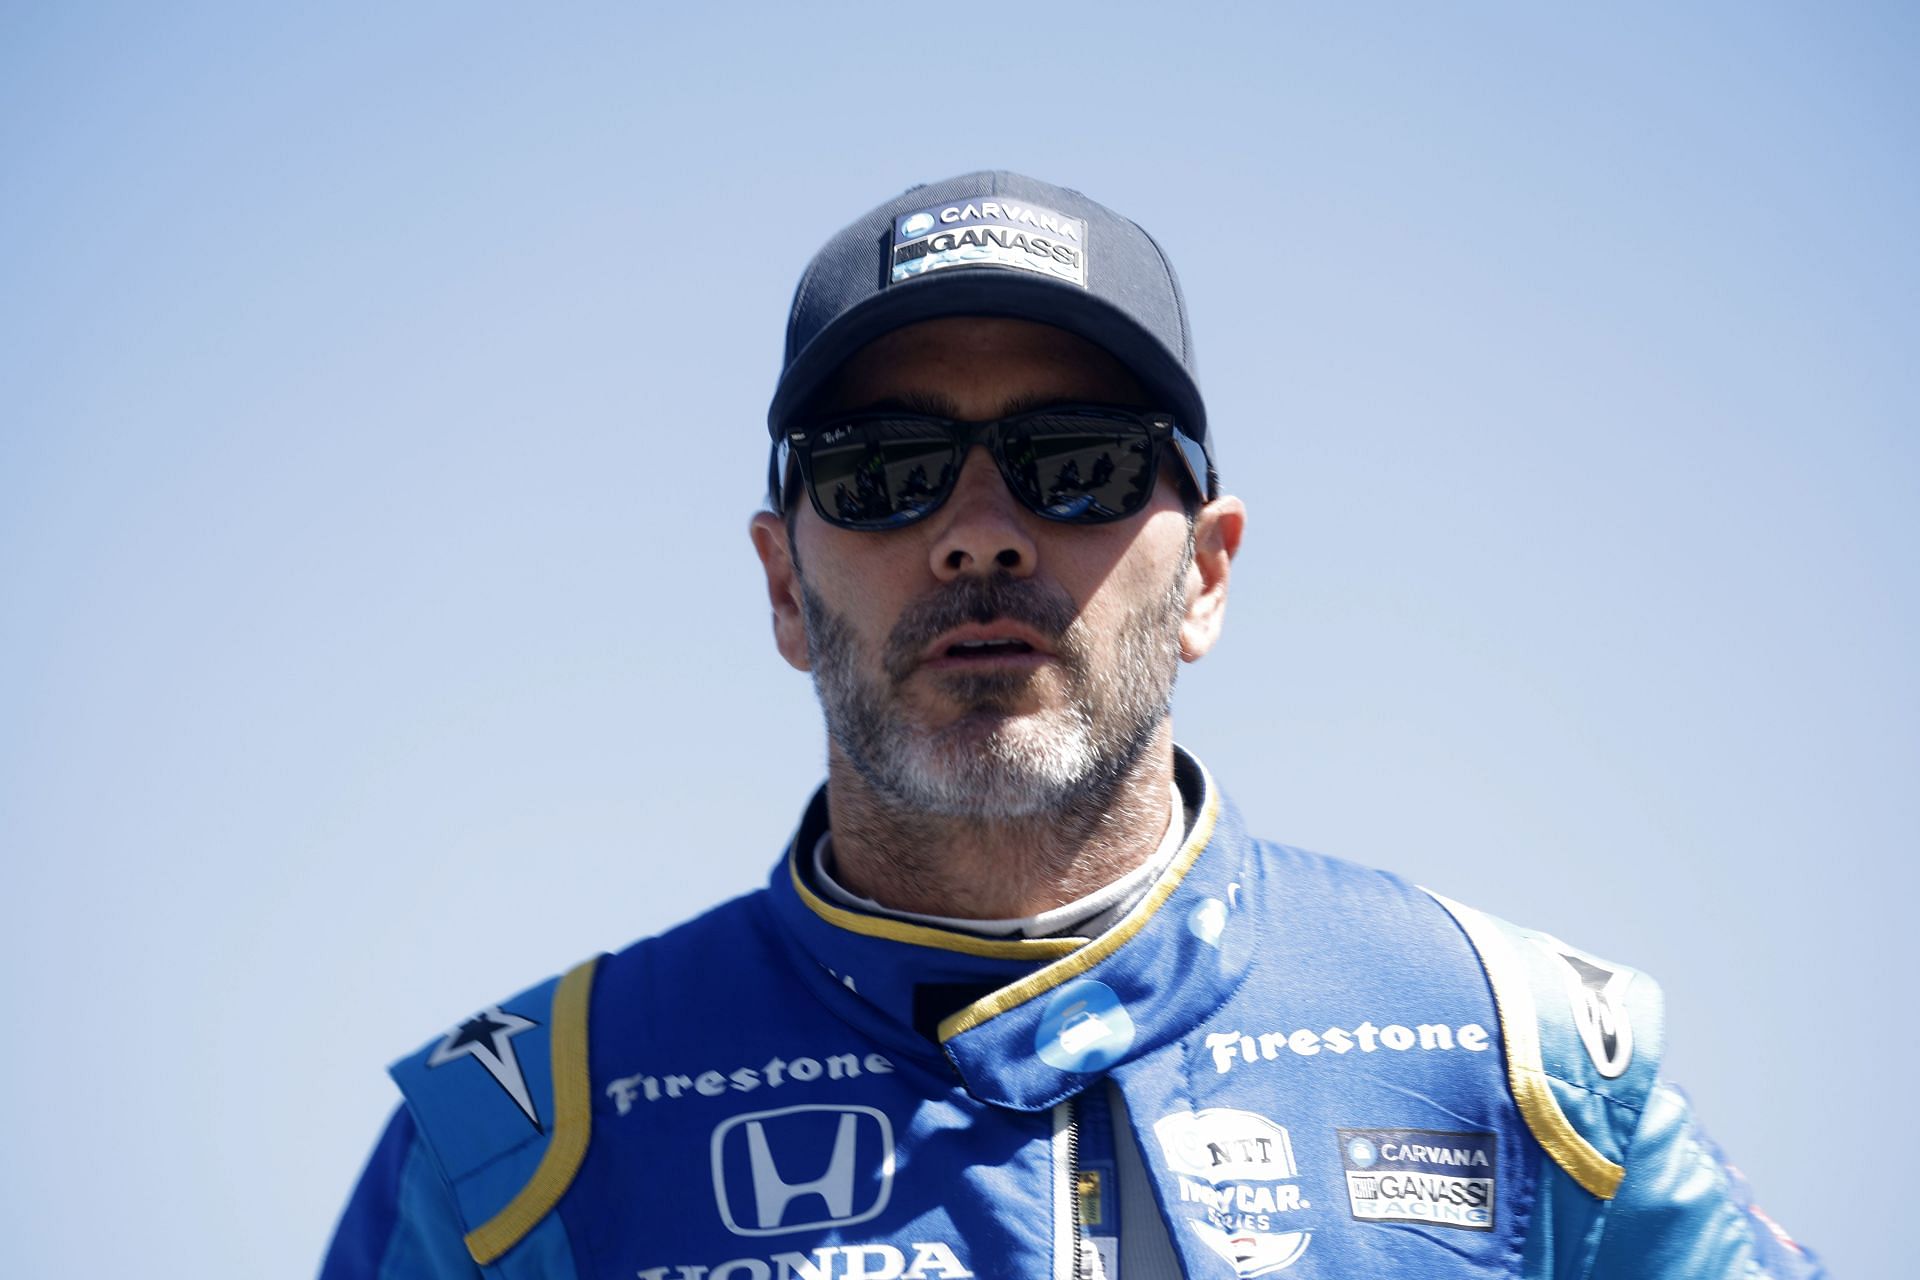 Jimmie Johnson prepares to drive during qualifying for the NTT IndyCar Series XPEL 375 at Texas Motor Speedway. (Photo by Chris Graythen/Getty Images)